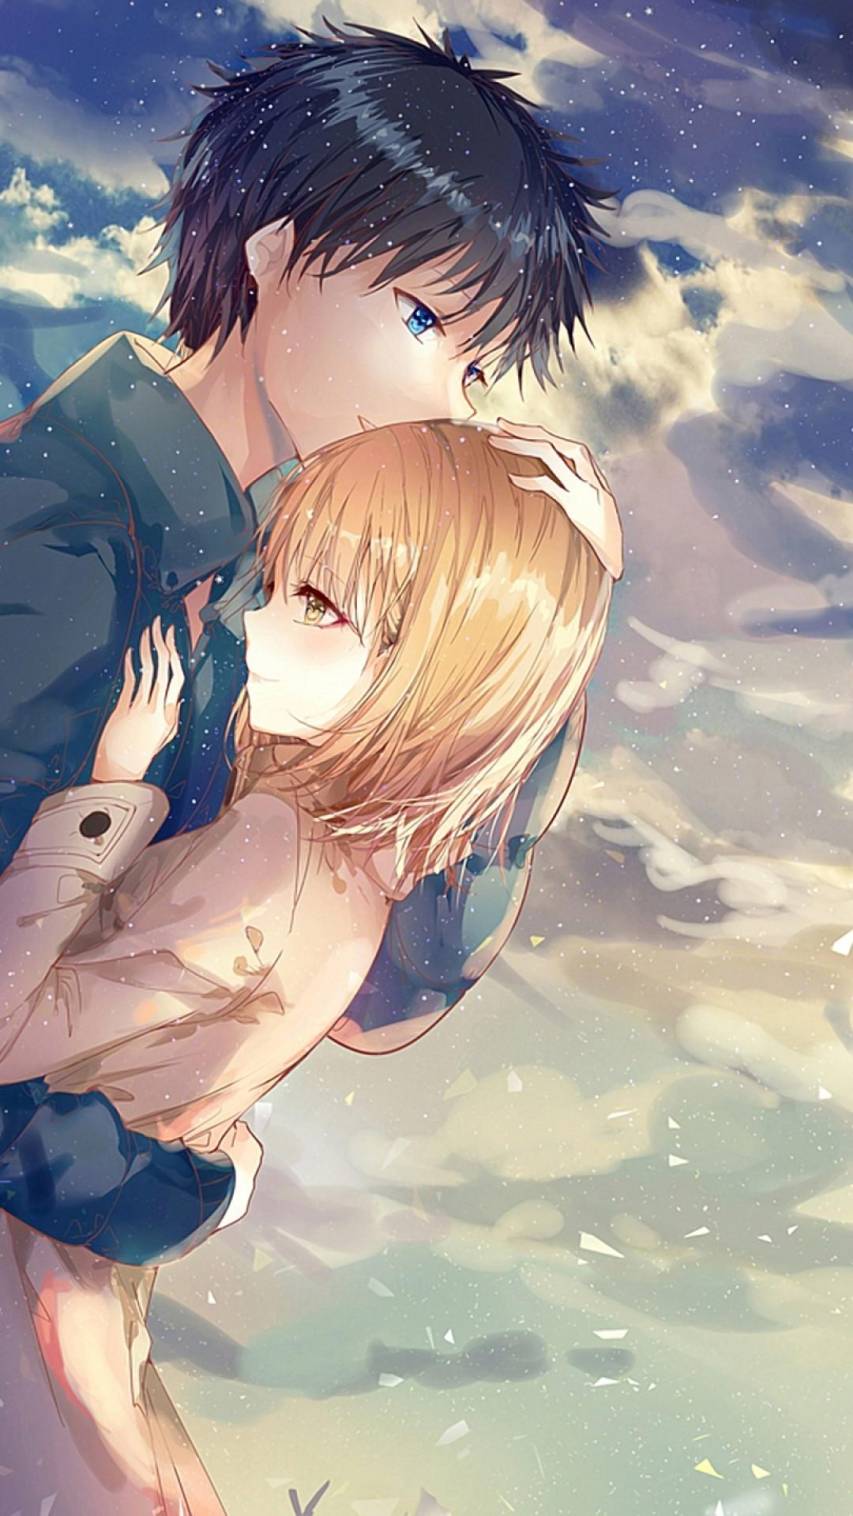 Anime love Art iPhone hd Backgrounds